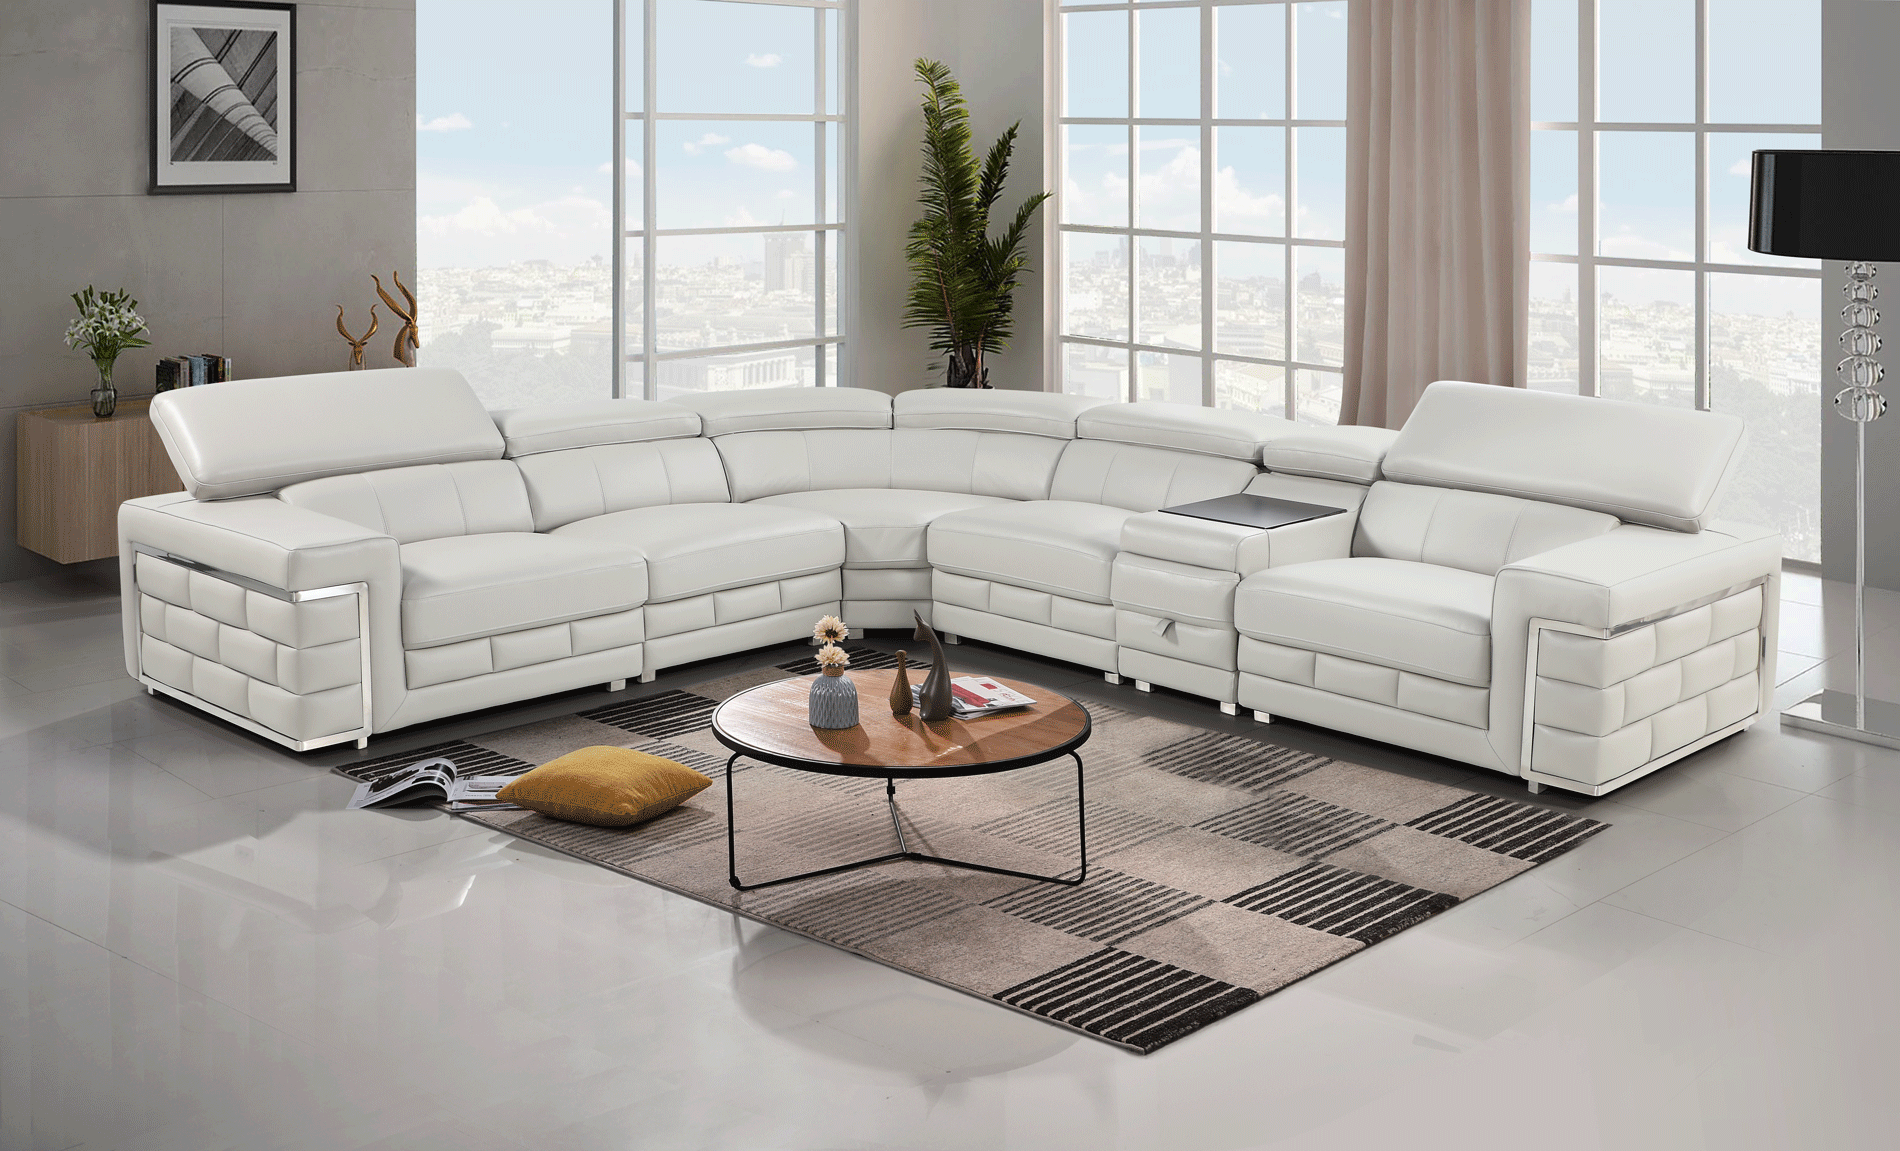 Living Room Furniture Sofas Loveseats and Chairs 378 Sectional